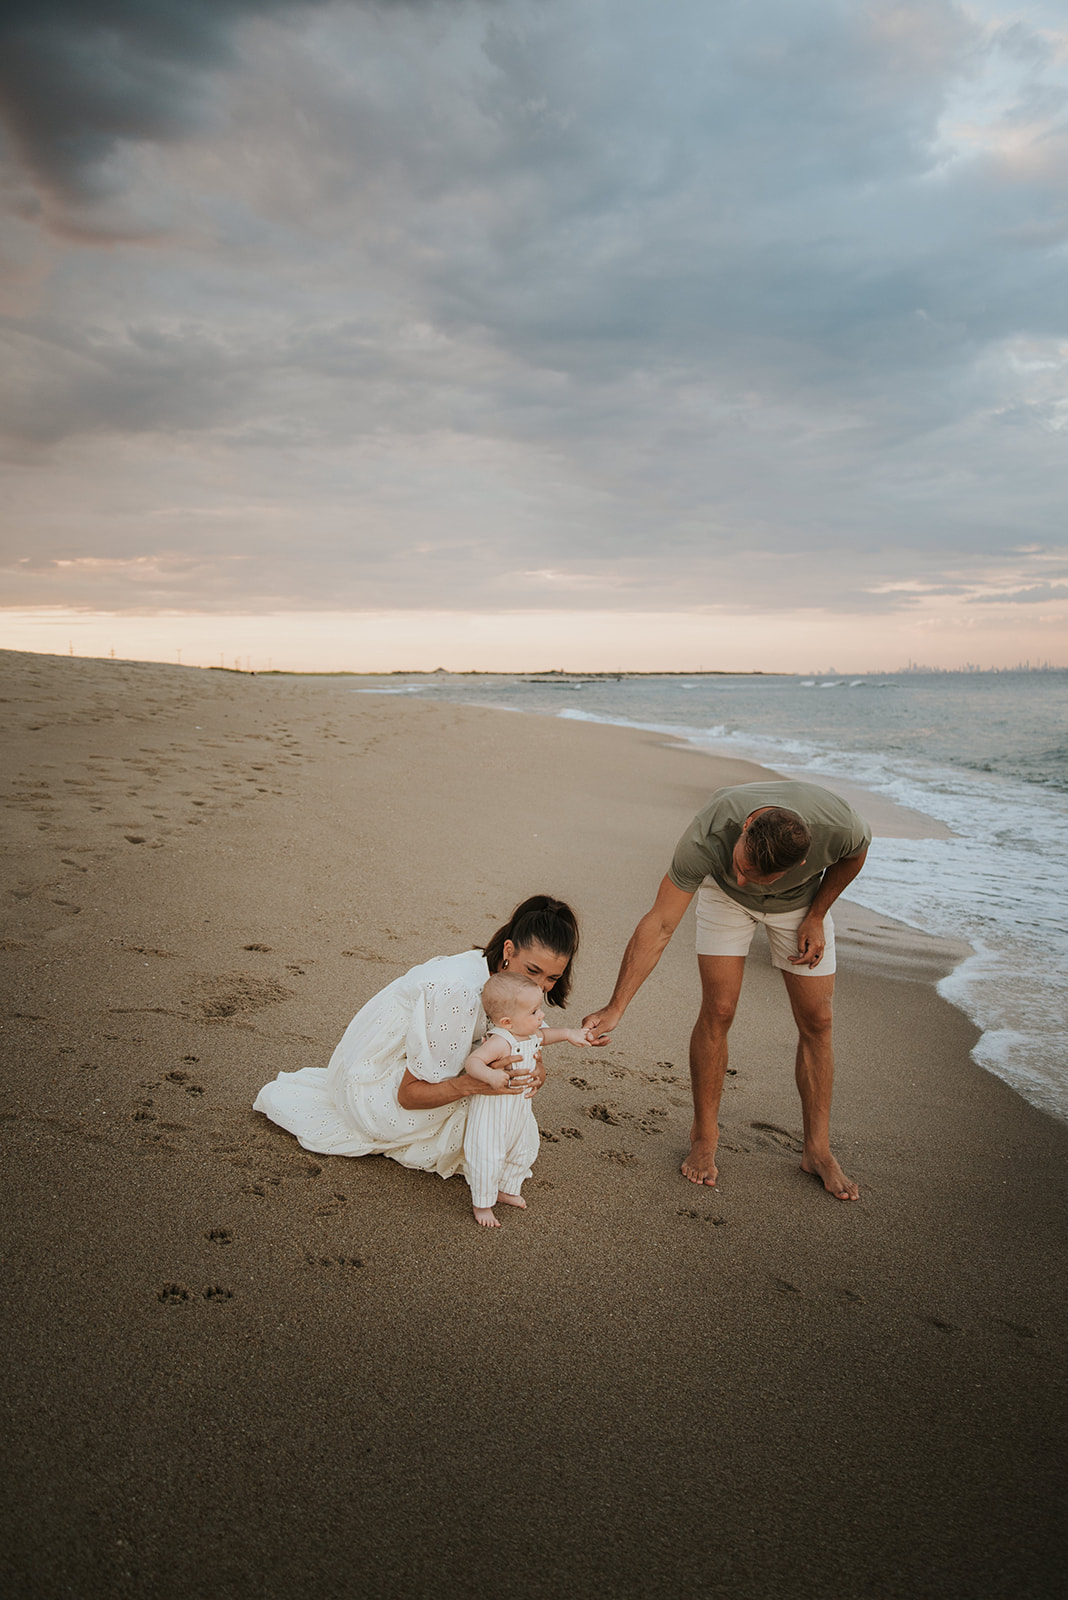 A family photoshoot at the beach with their 6 month old baby who is at the beach for the first time at sunset